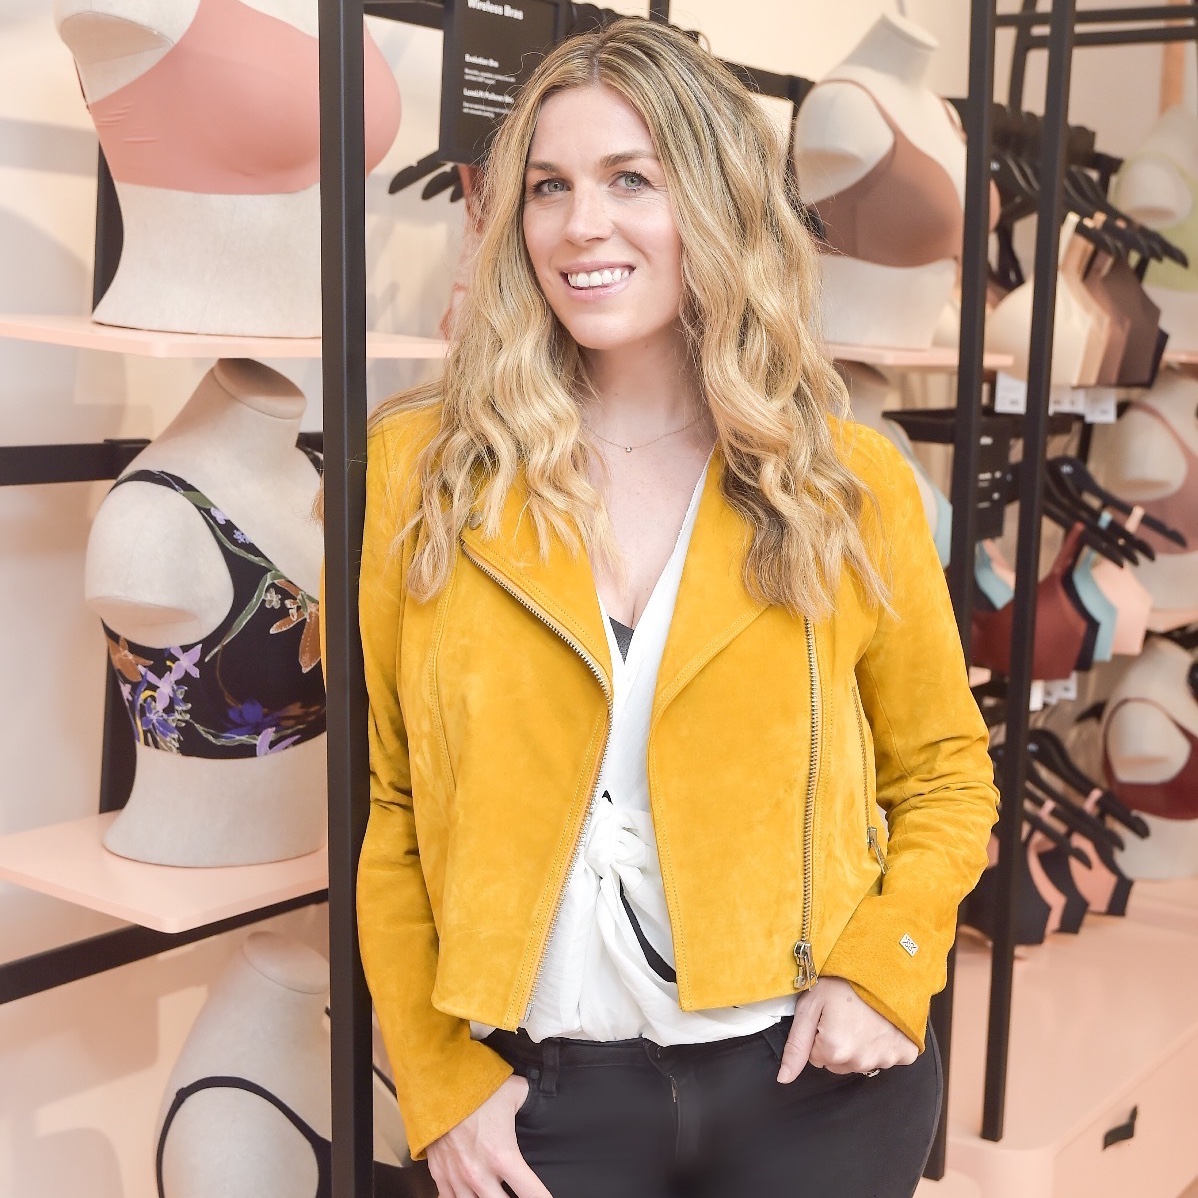 CEO of Knix Joanna Griffiths stands in front of a shelf holding mannequin torsos that display Knix bras.